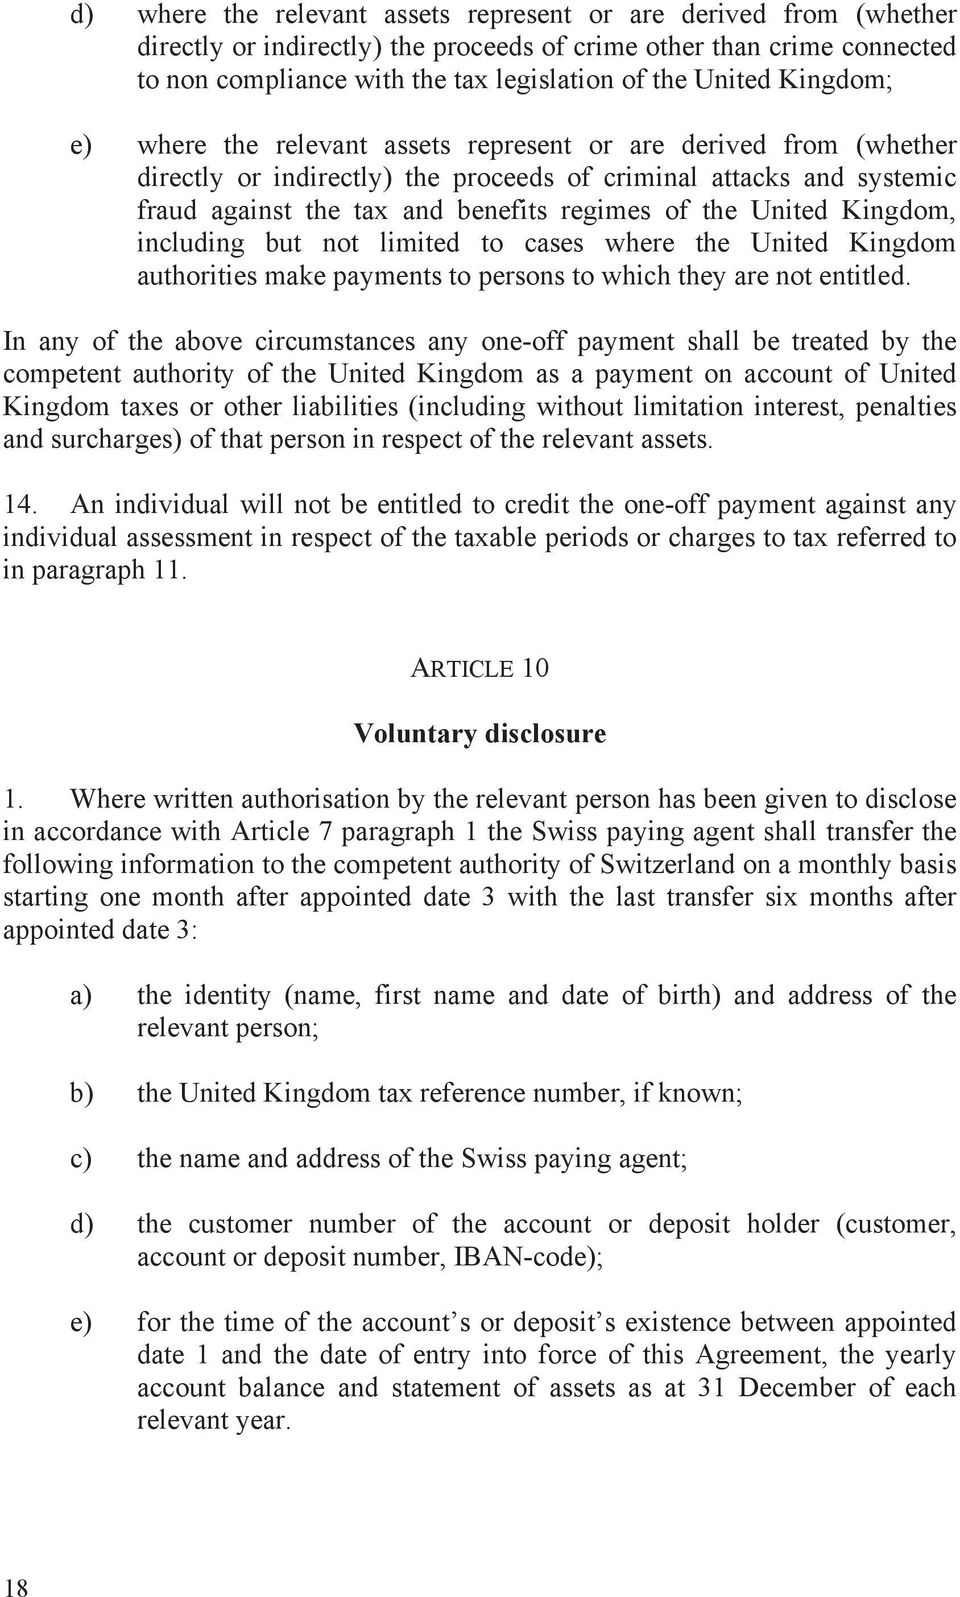 United Kingdom, including but not limited to cases where the United Kingdom authorities make payments to persons to which they are not entitled.